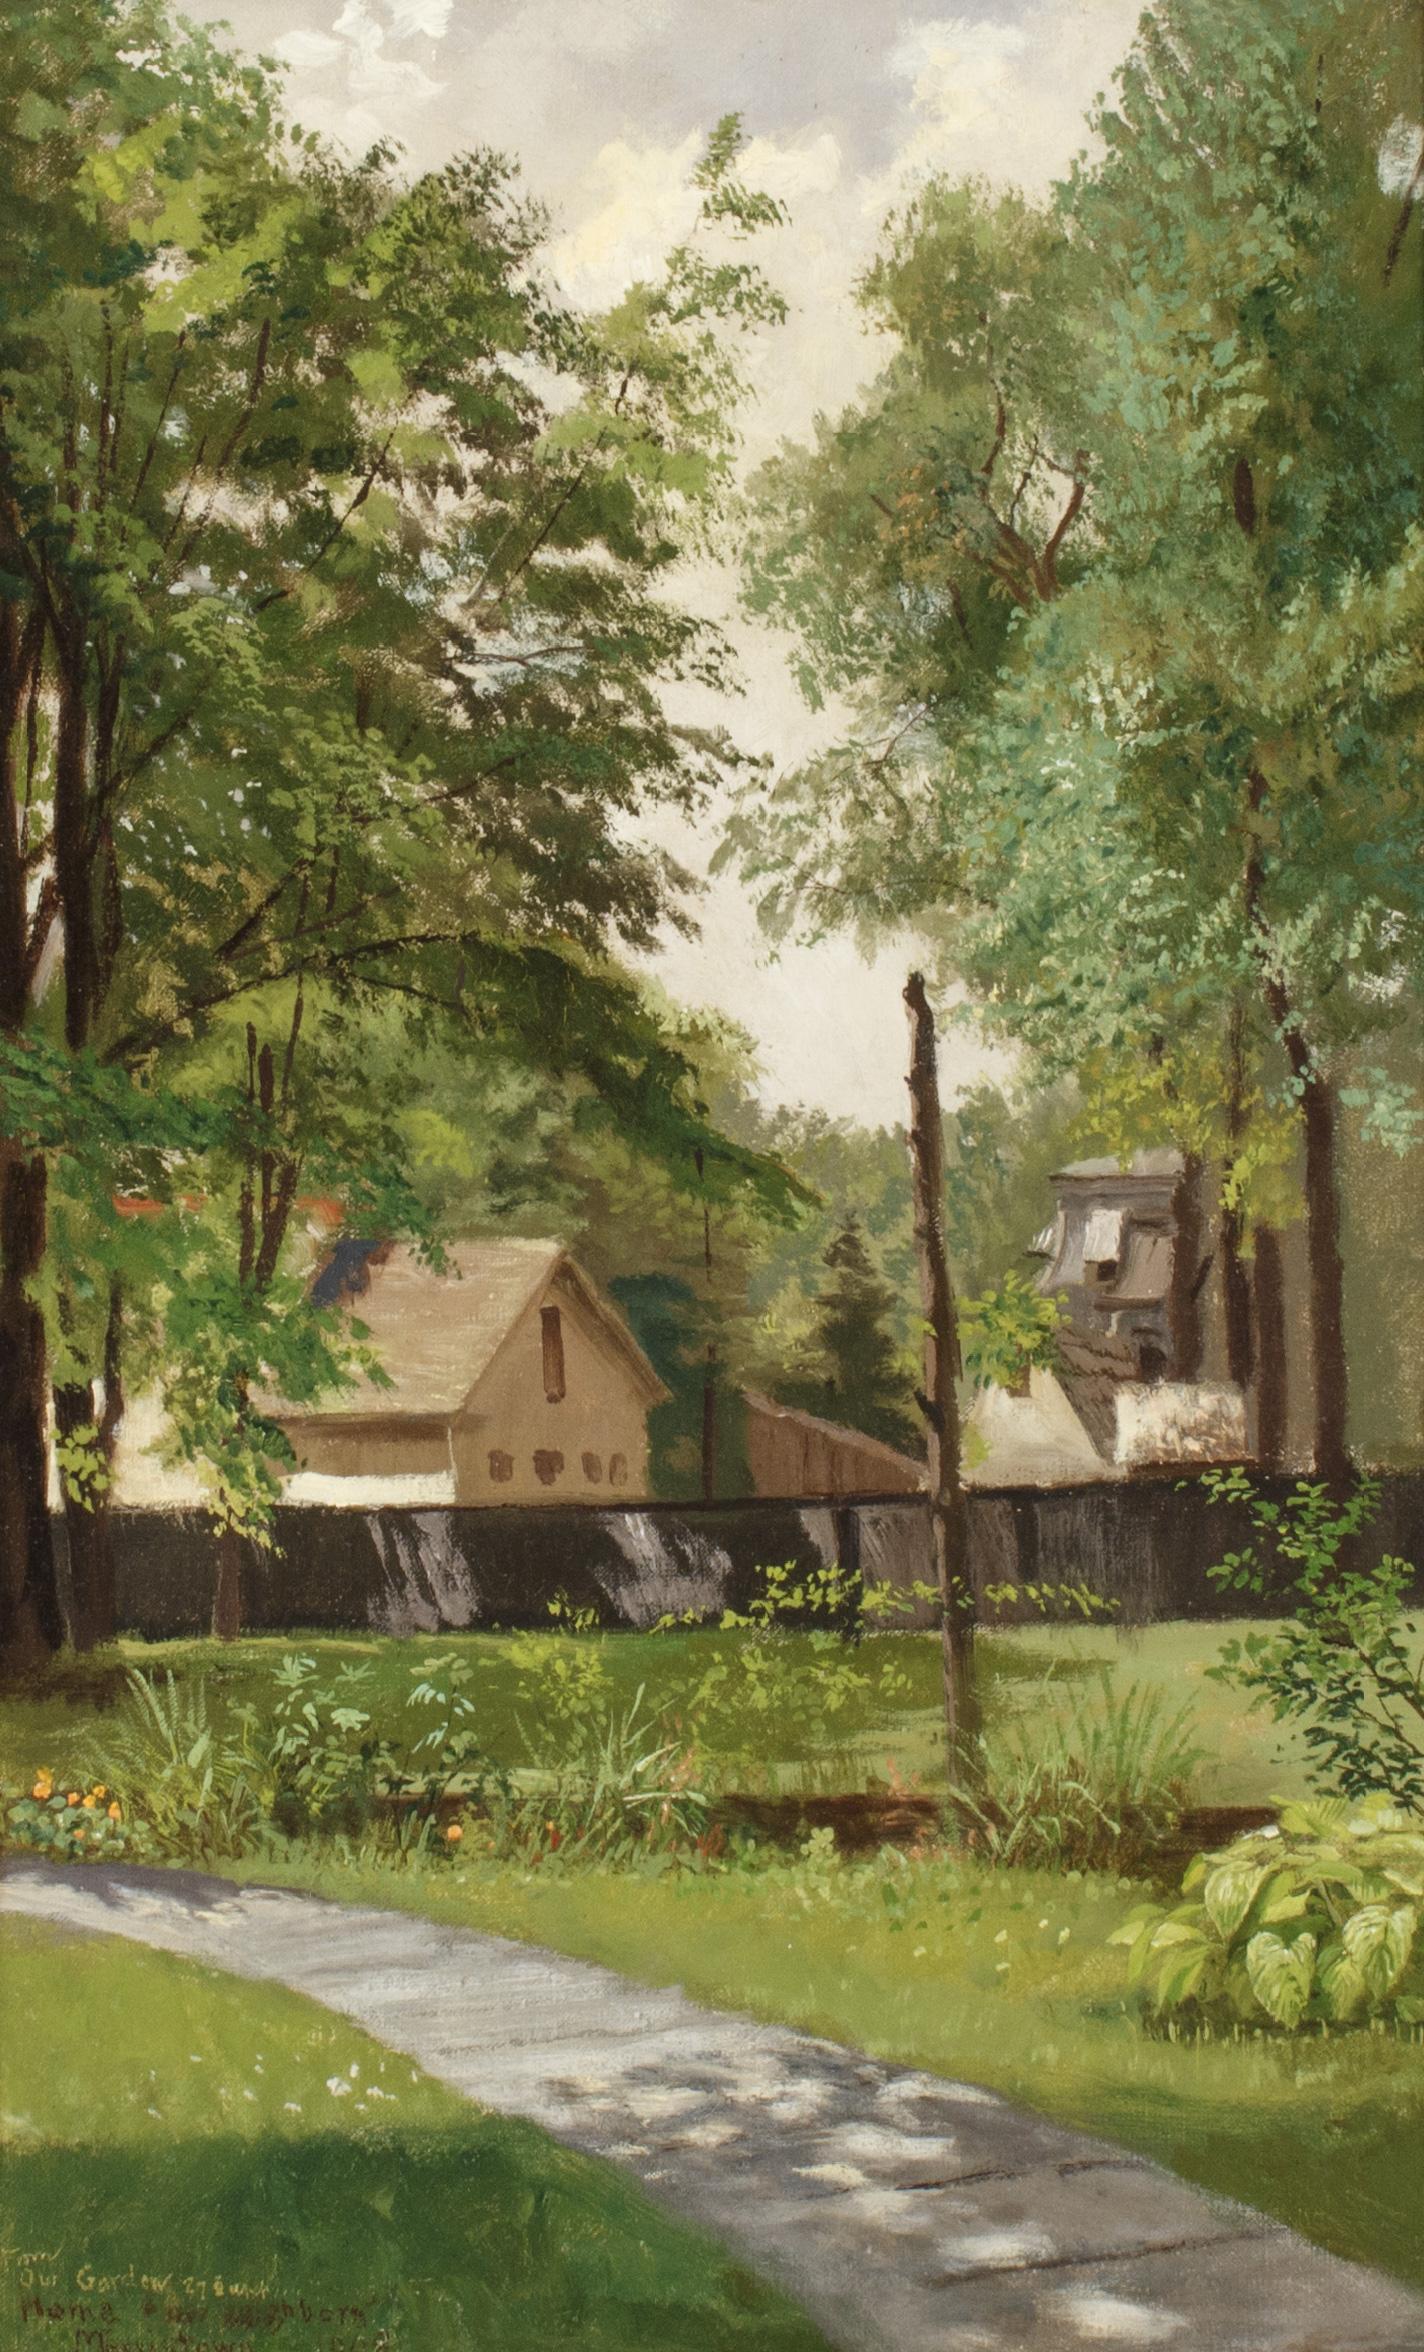 Oil painting of a House and Garden, Morristown, New Jersey in 1908 - Painting by Frank Waller